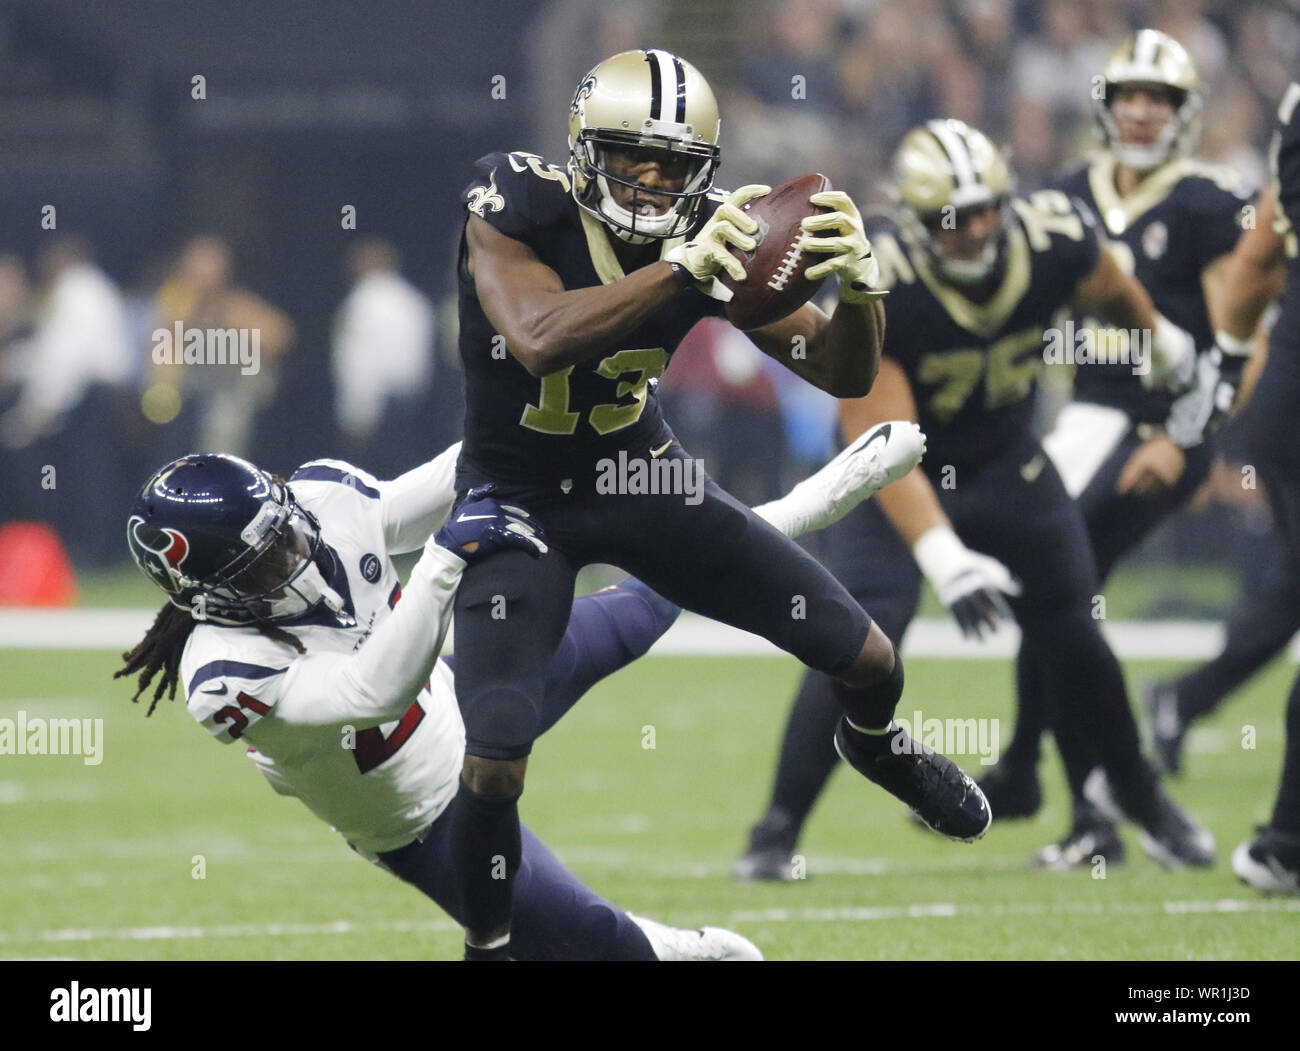 New Orleans, LOUISIANA, USA. 9th Sep, 2019. (top to bottom) New Orleans Saints wide receiver Michael Thomas is tackled by Houston Texans cornerback Bradley Roby in New Orleans, Louisiana USA on September 9, 2019. The Saints beat the Texans 30-28. Credit: Dan Anderson/ZUMA Wire/Alamy Live News Stock Photo